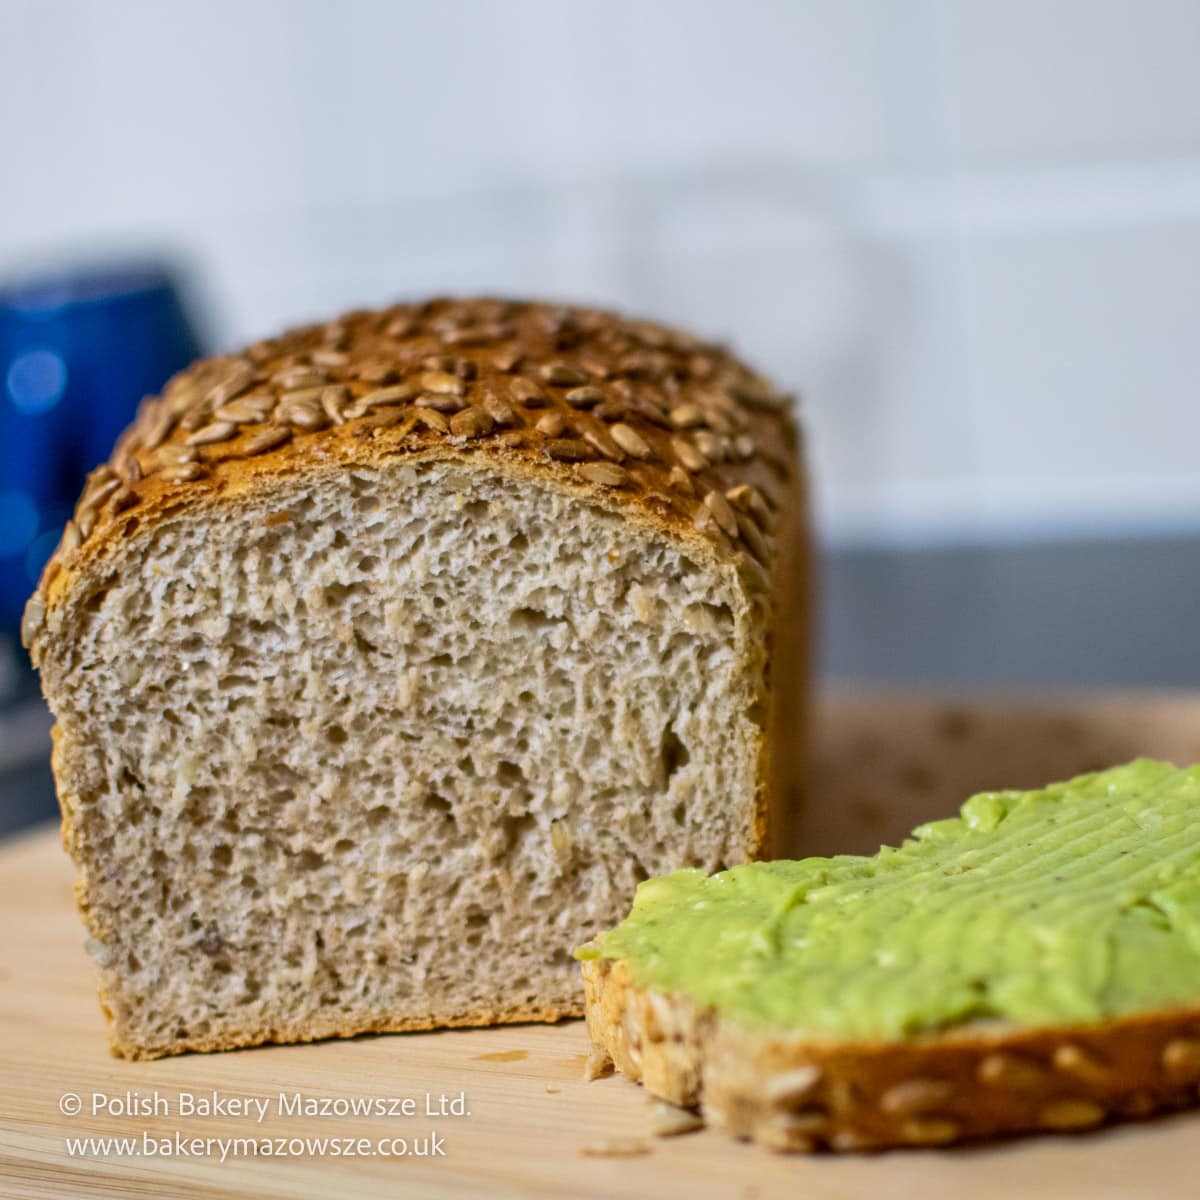 Wholemeal bread and Guacamole